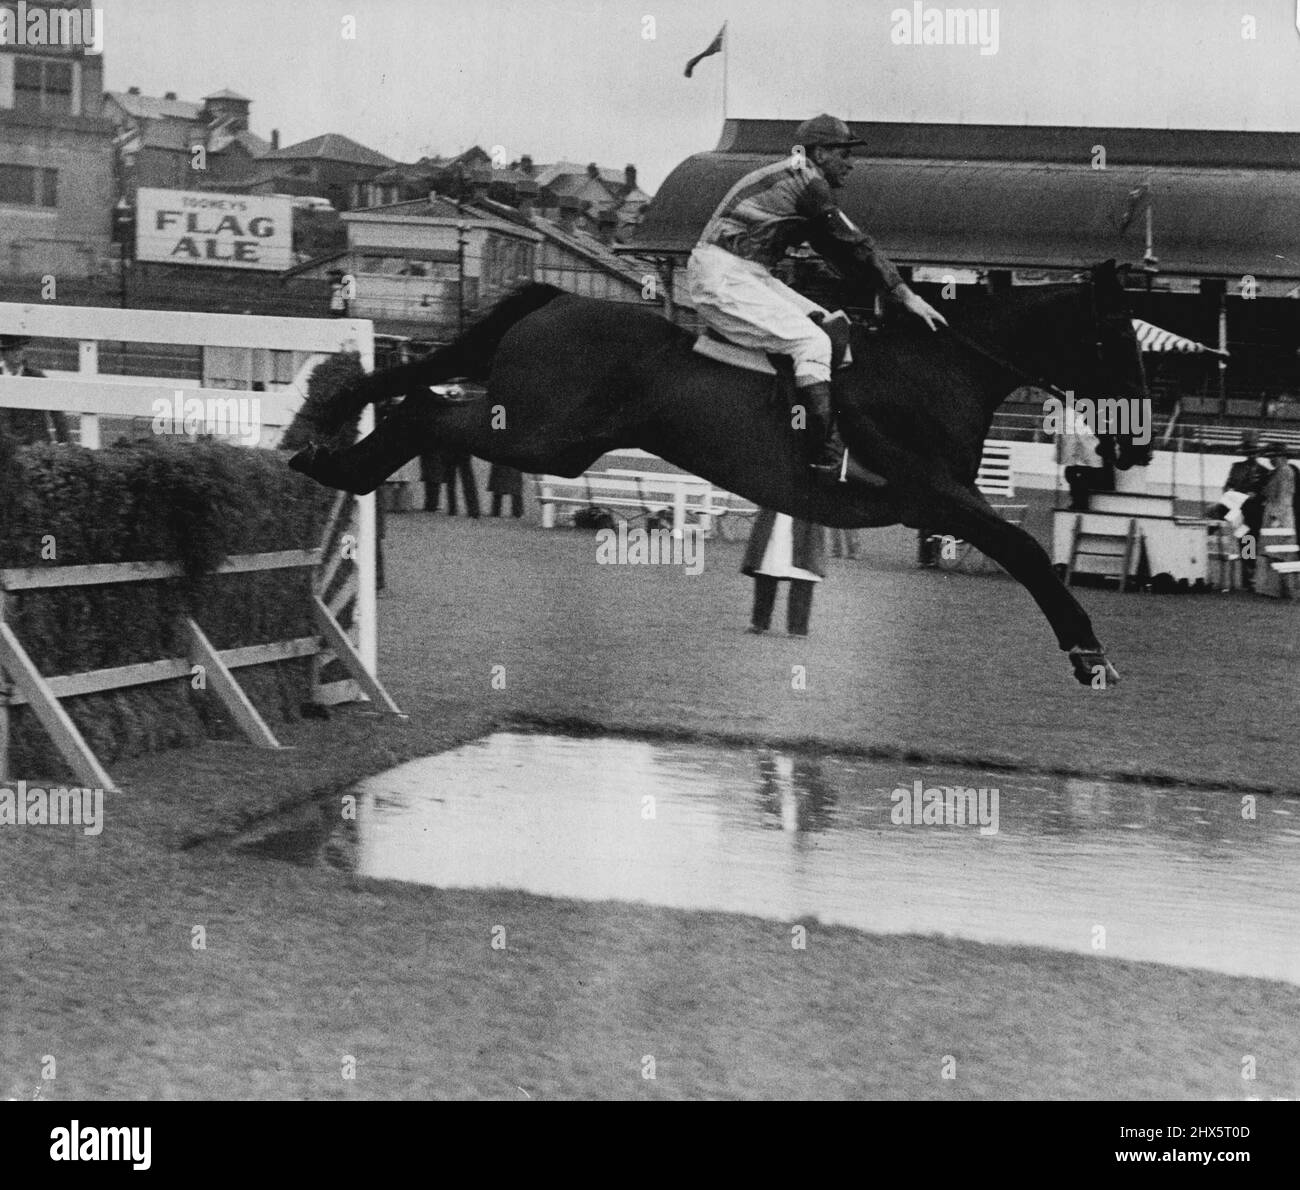 Royal Easter Show Ring Events, Trotting School Girls Displays, Etc. - (Siehe auch: File, Royal Easter Show, Horses Jumping Events, etc. ) - R.A.S. 27. April 1950. Stockfoto